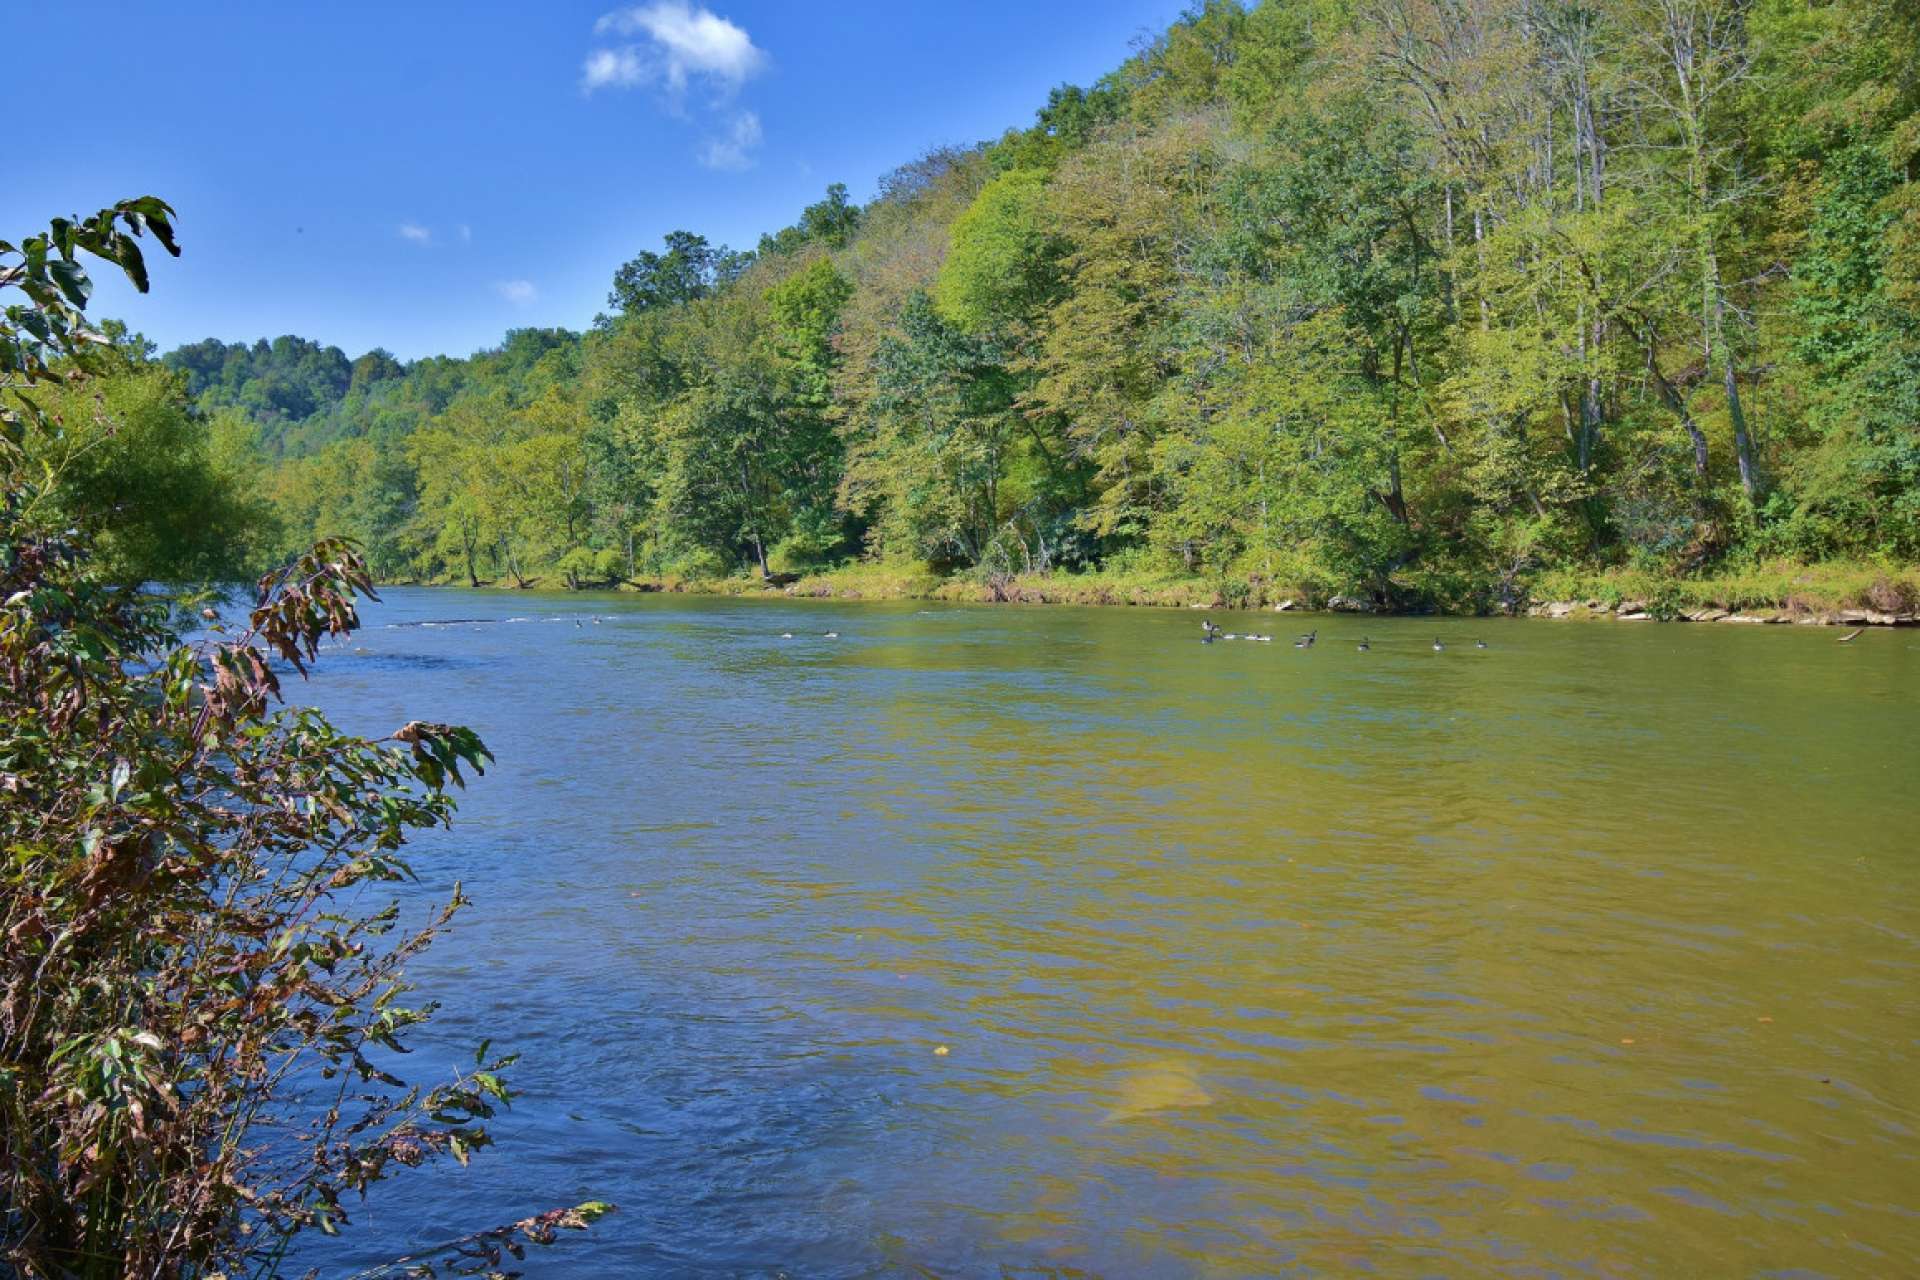 Hidden Mountain is a well established community in the Crumpler area of Ashe County in the NC Mountains, and offers New River access to residents.